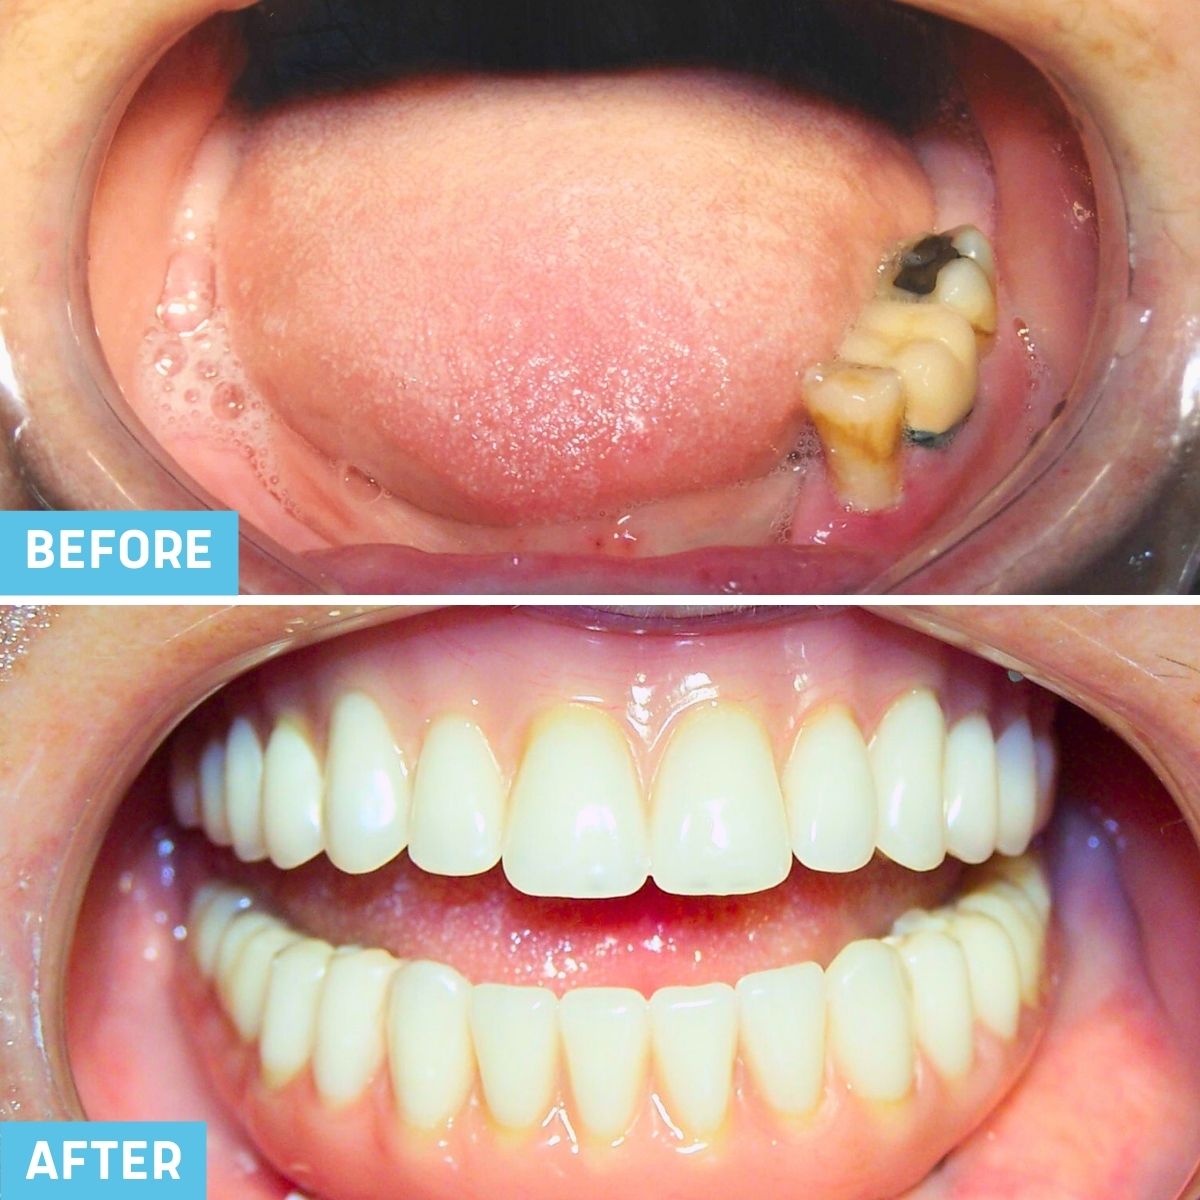 full mouth restoration with dental implants - before and after